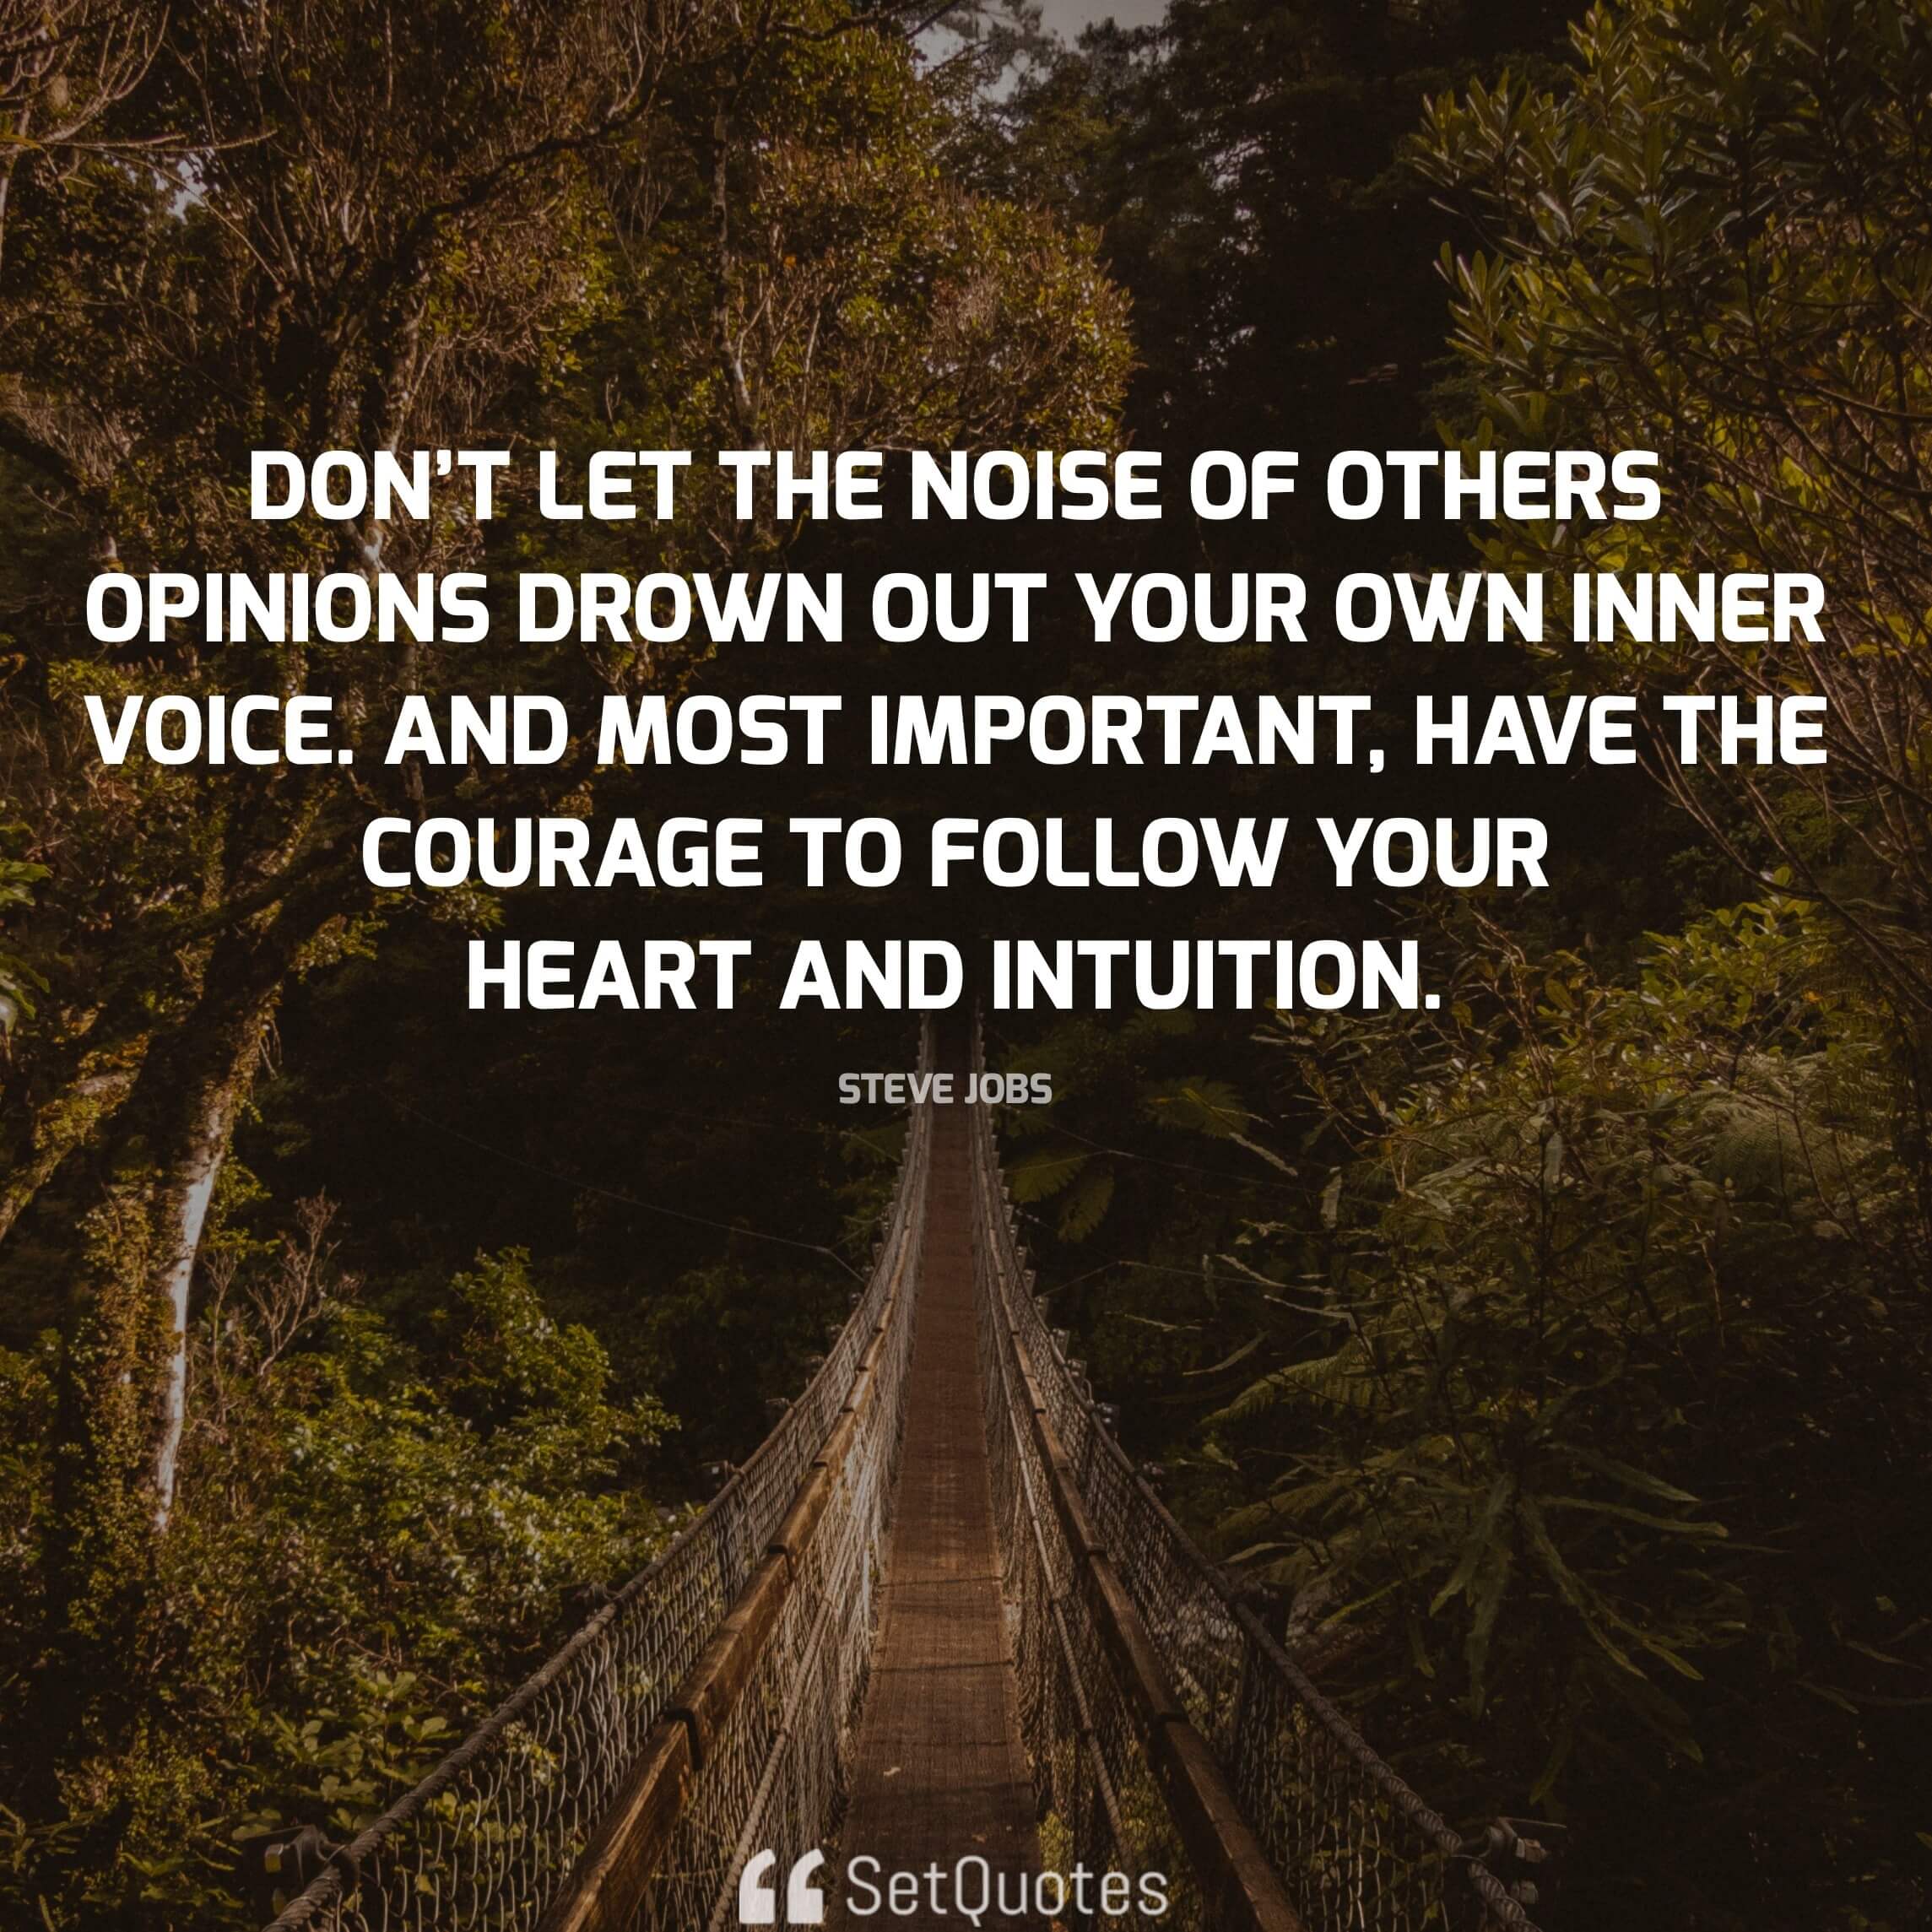 Don’t let the noise of others’ opinions drown out your own inner voice. And most important, have the courage to follow your heart and intuition. - steve jobs quotes